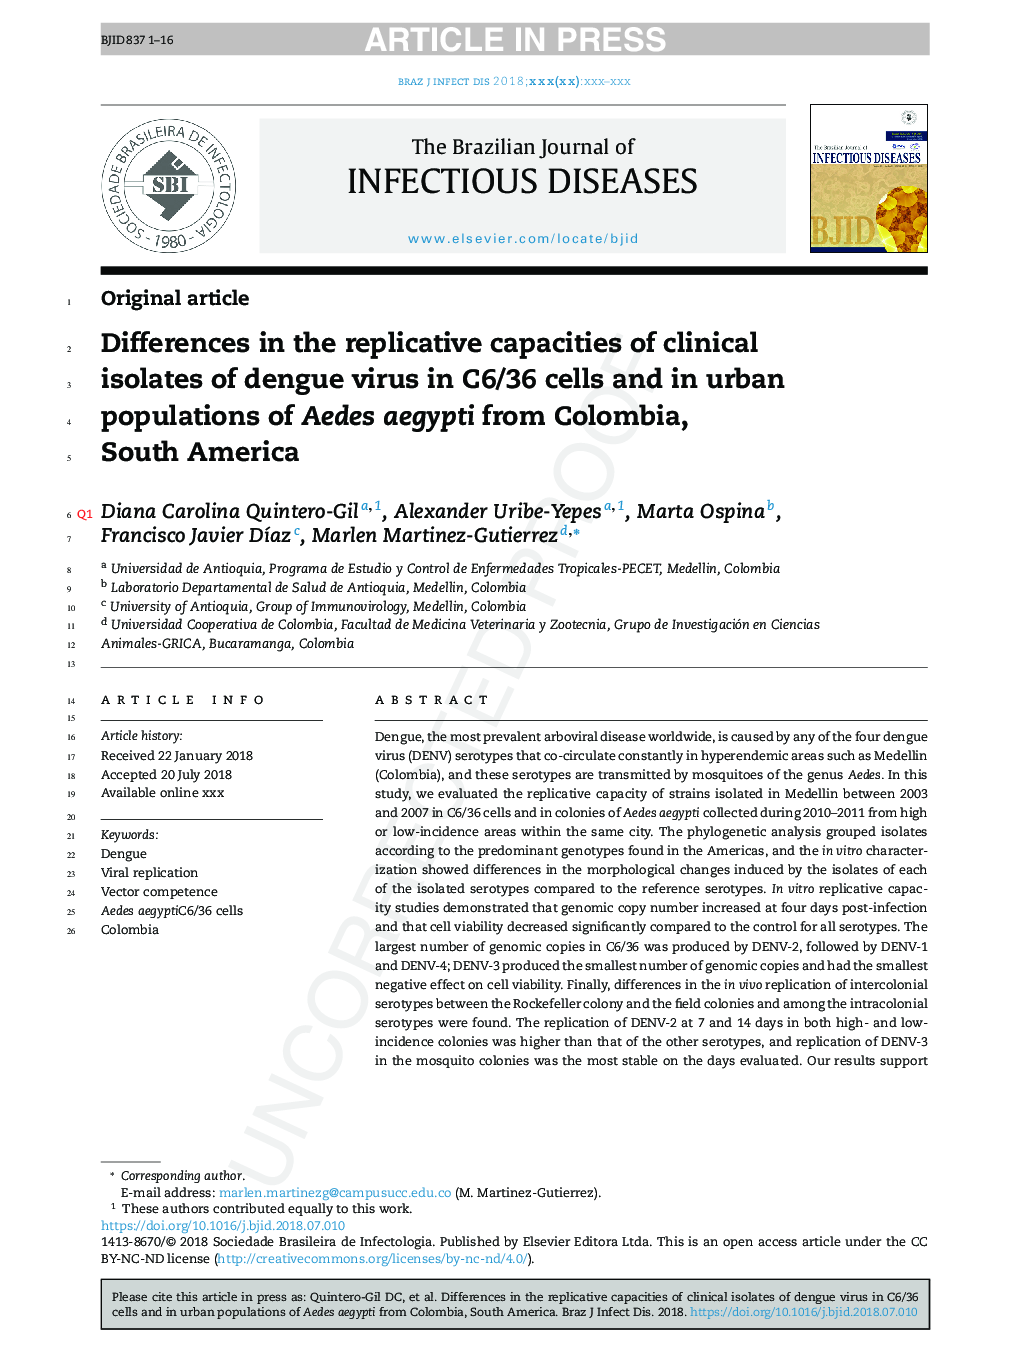 Differences in the replicative capacities of clinical isolates of dengue virus in C6/36 cells and in urban populations of Aedes aegypti from Colombia, South America